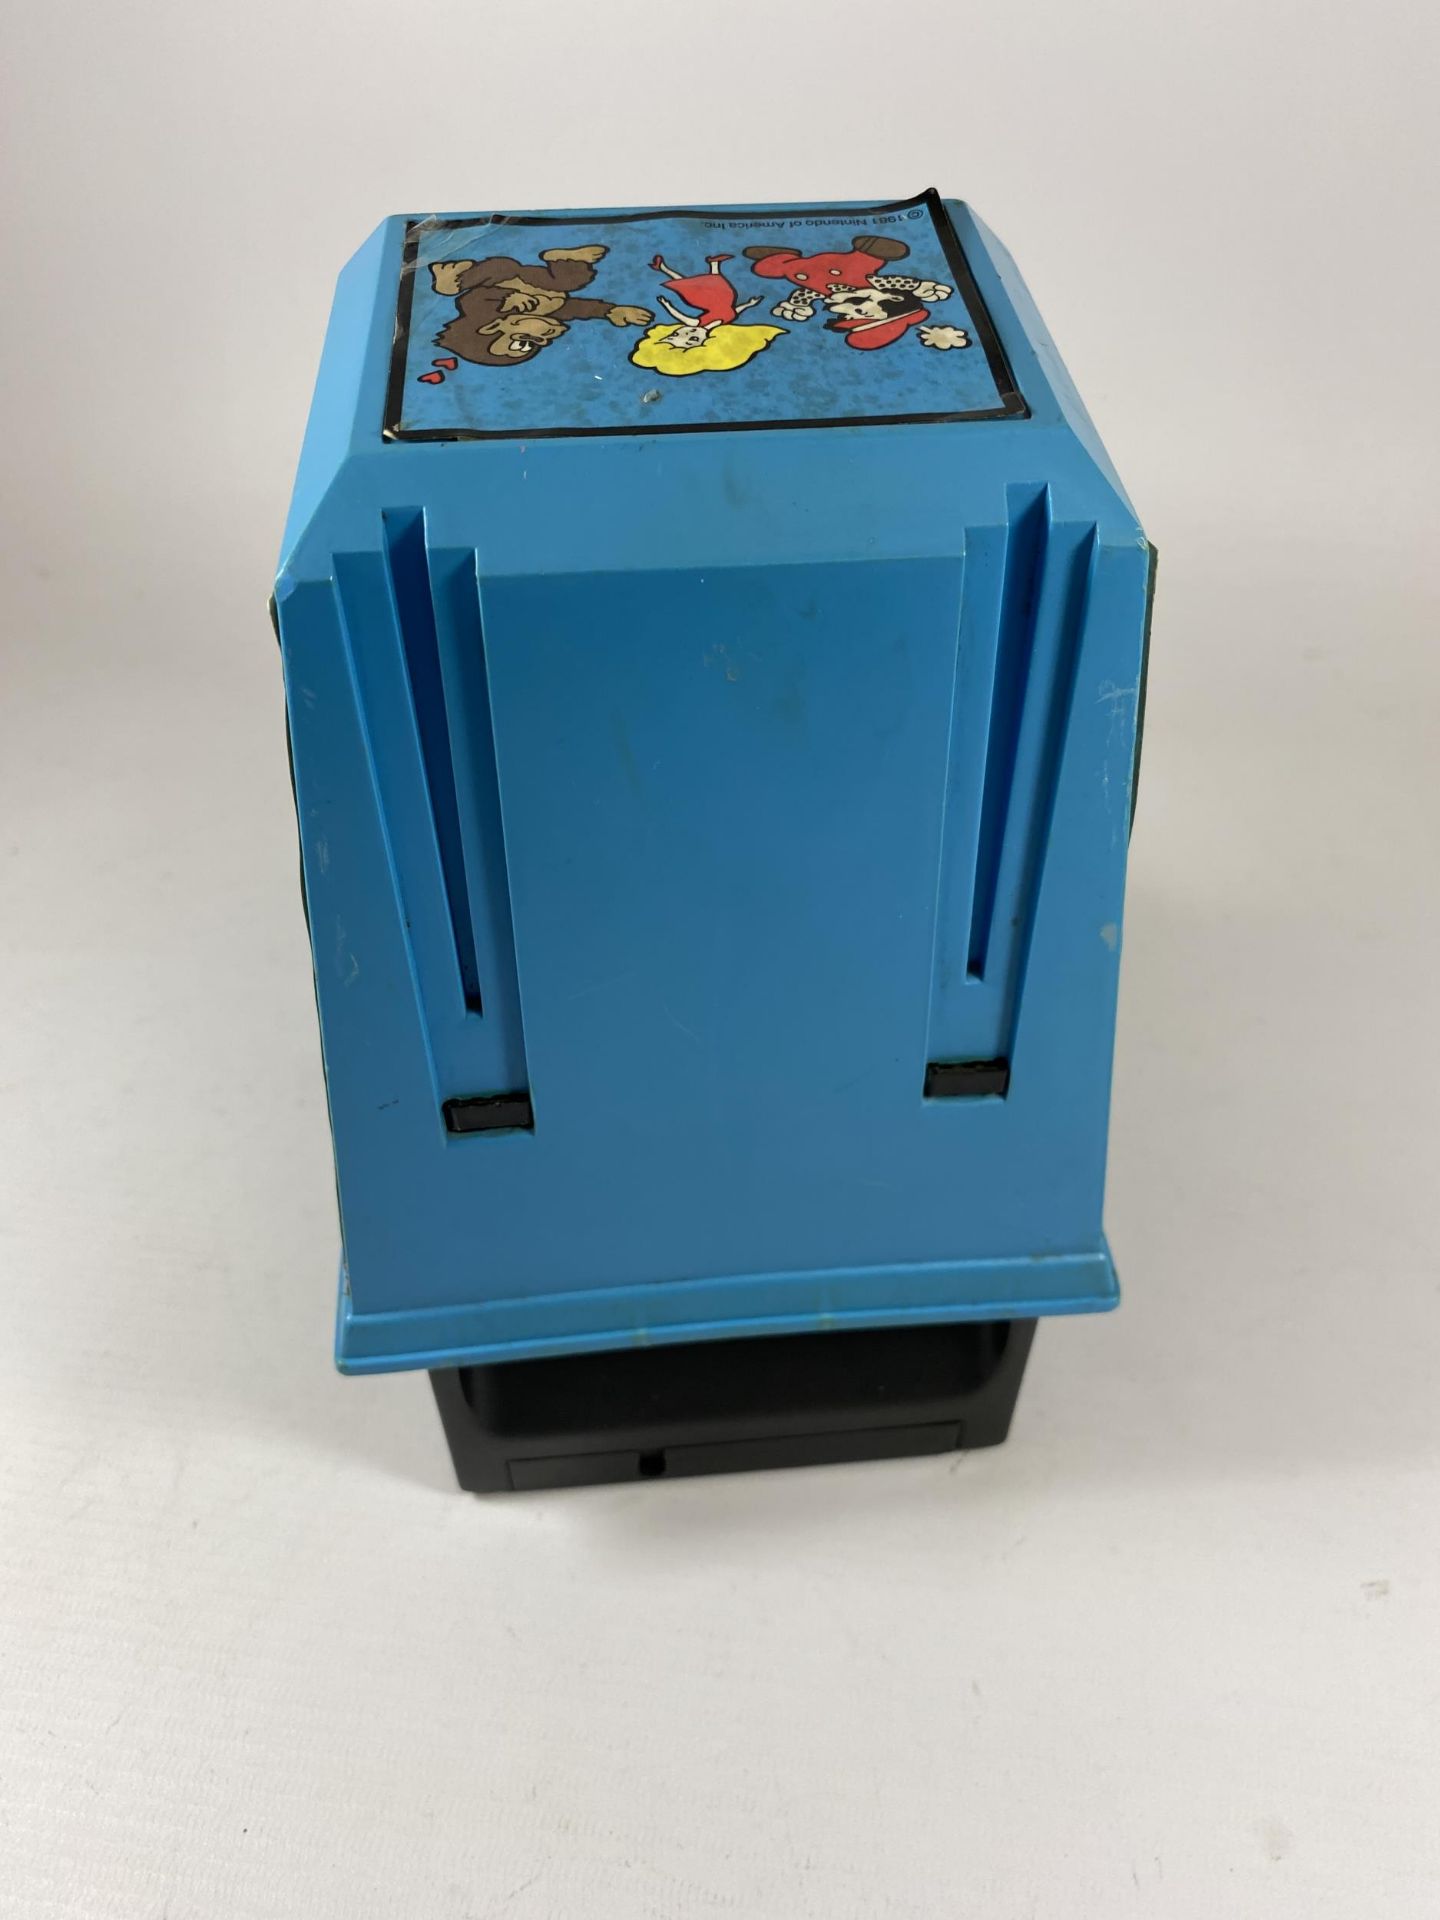 A RETRO 1981 COLECO DONKEY KONG TABLE TOP ARCADE GAME - Image 3 of 6